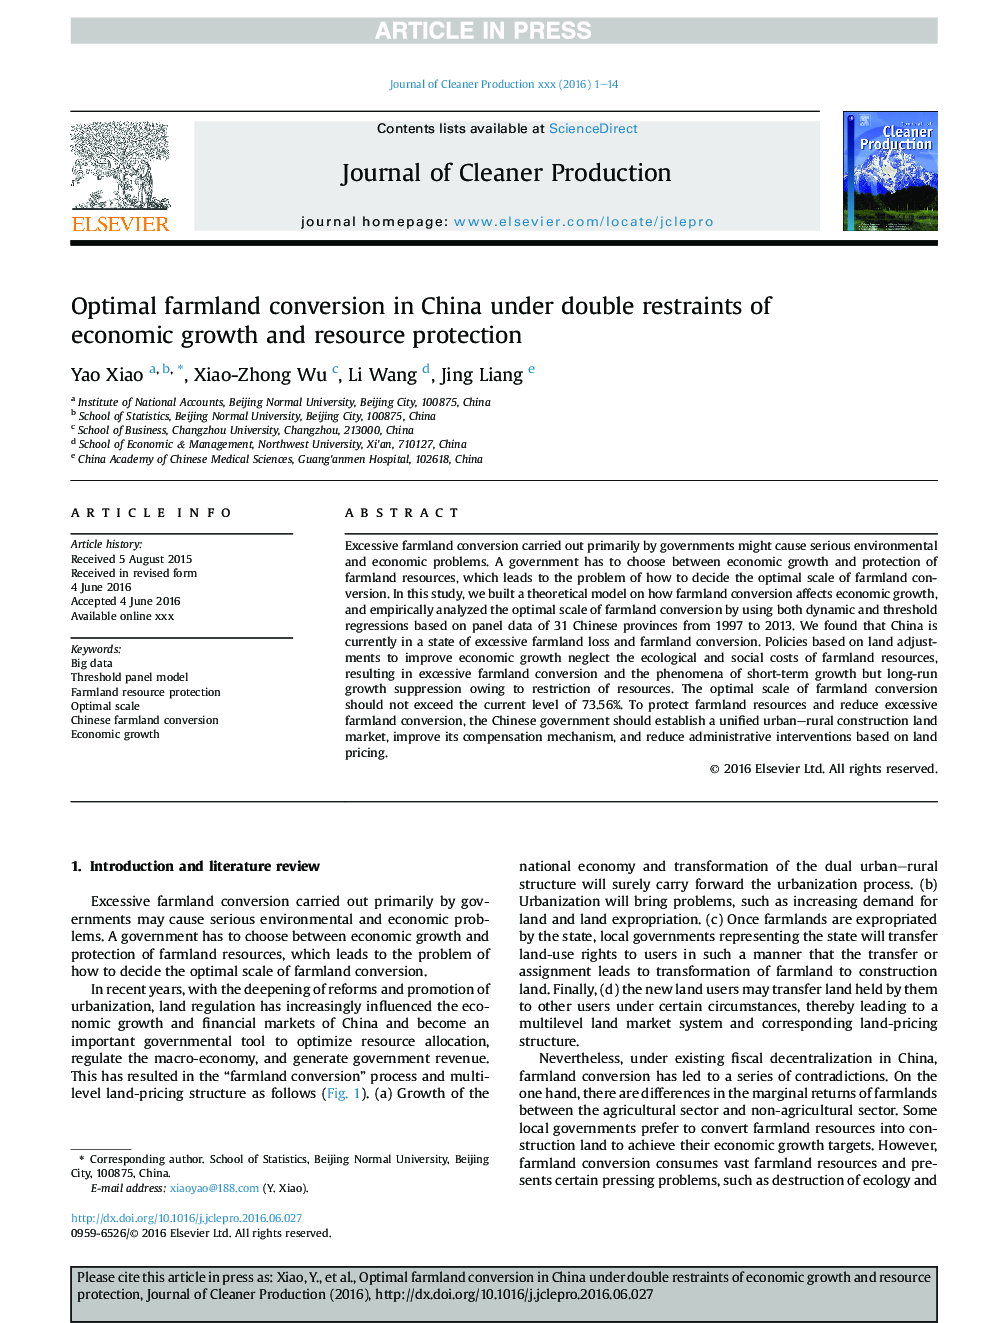 Optimal farmland conversion in China under double restraints of economic growth and resource protection